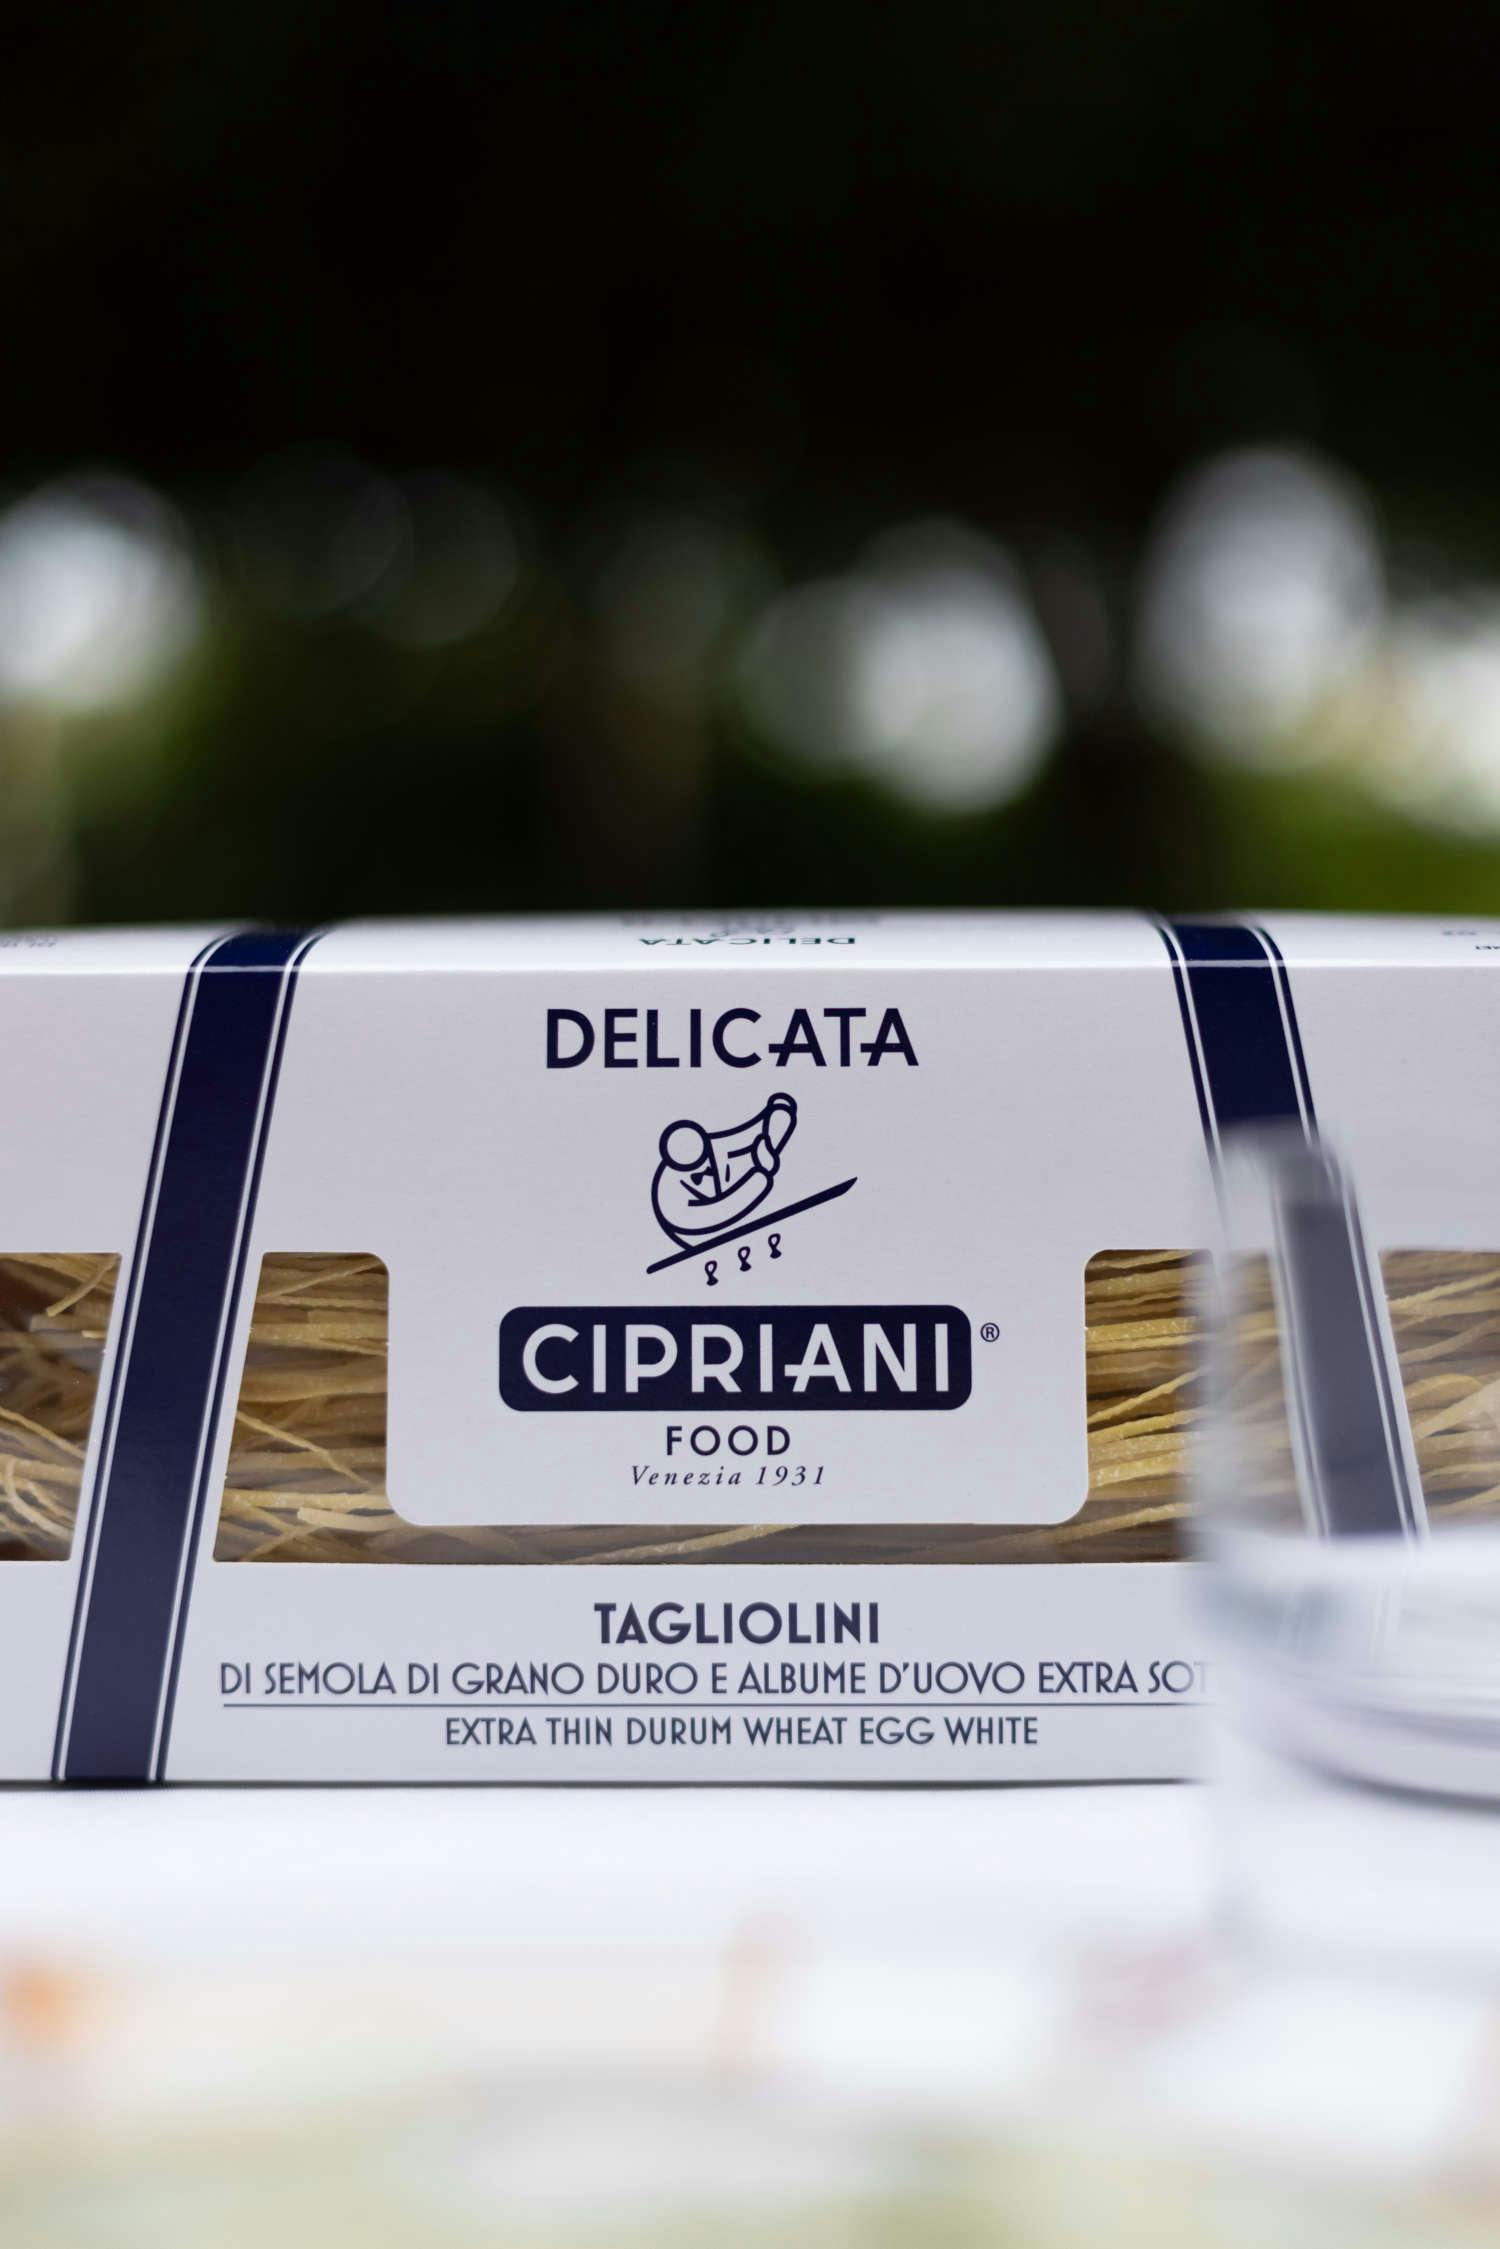 DE MEDICI AND CIPRIANI® FOOD WIN GOLD SOFI™ FROM THE SPECIALTY FOODS ASSOCIATION